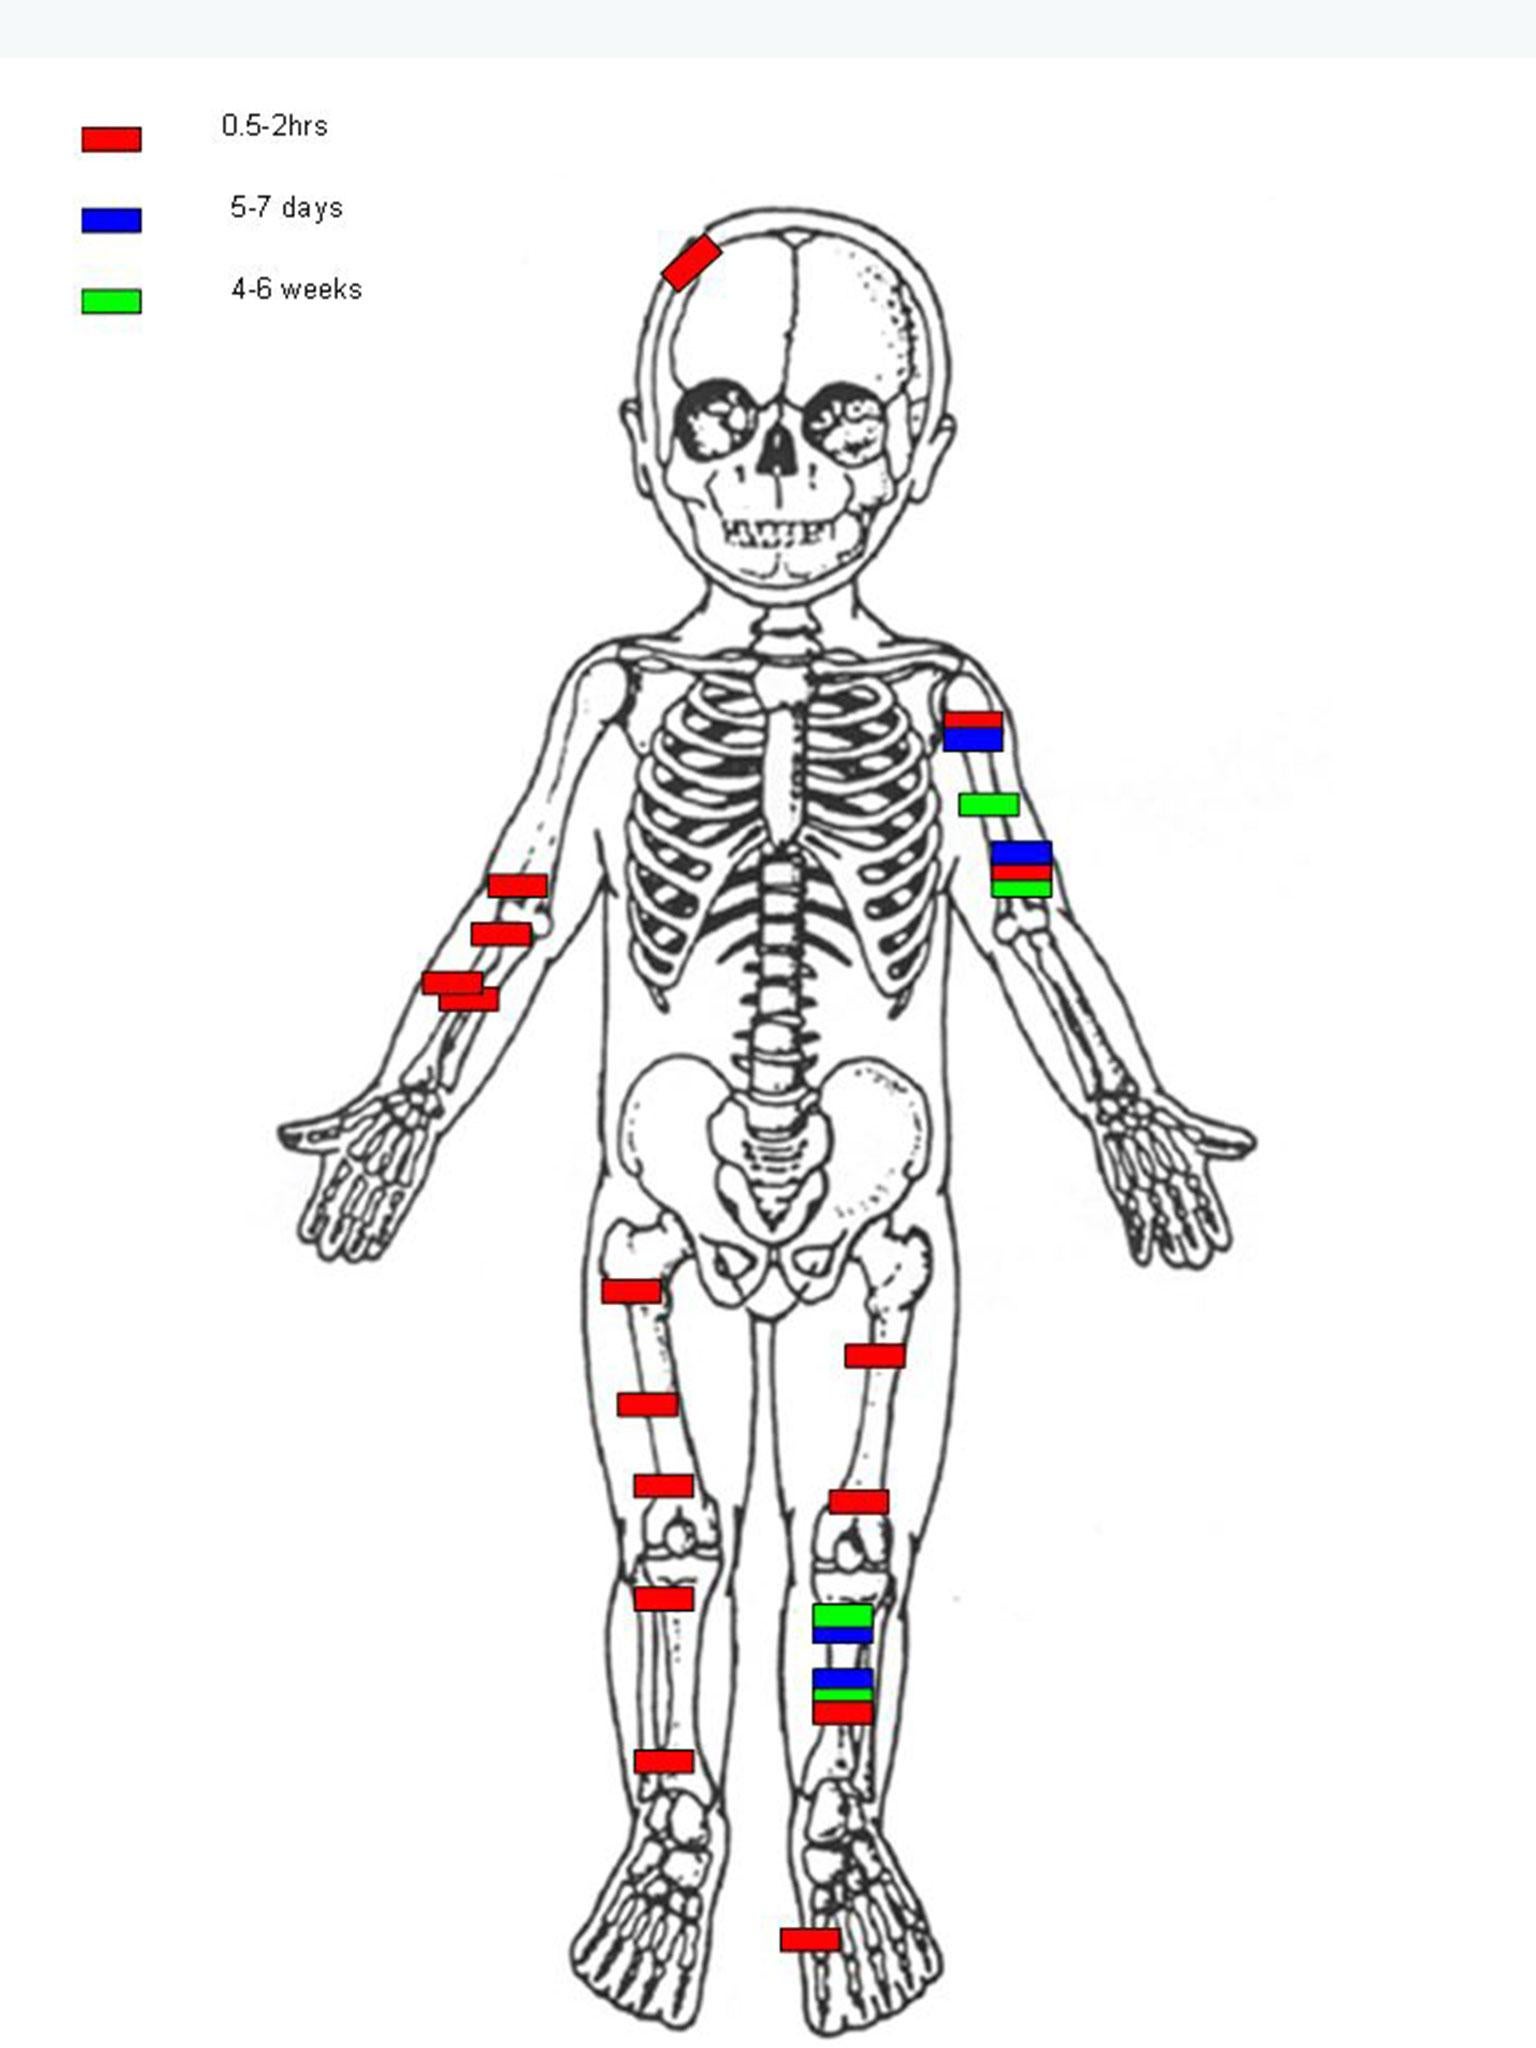 An illustration showing the extent of Noah's injuries